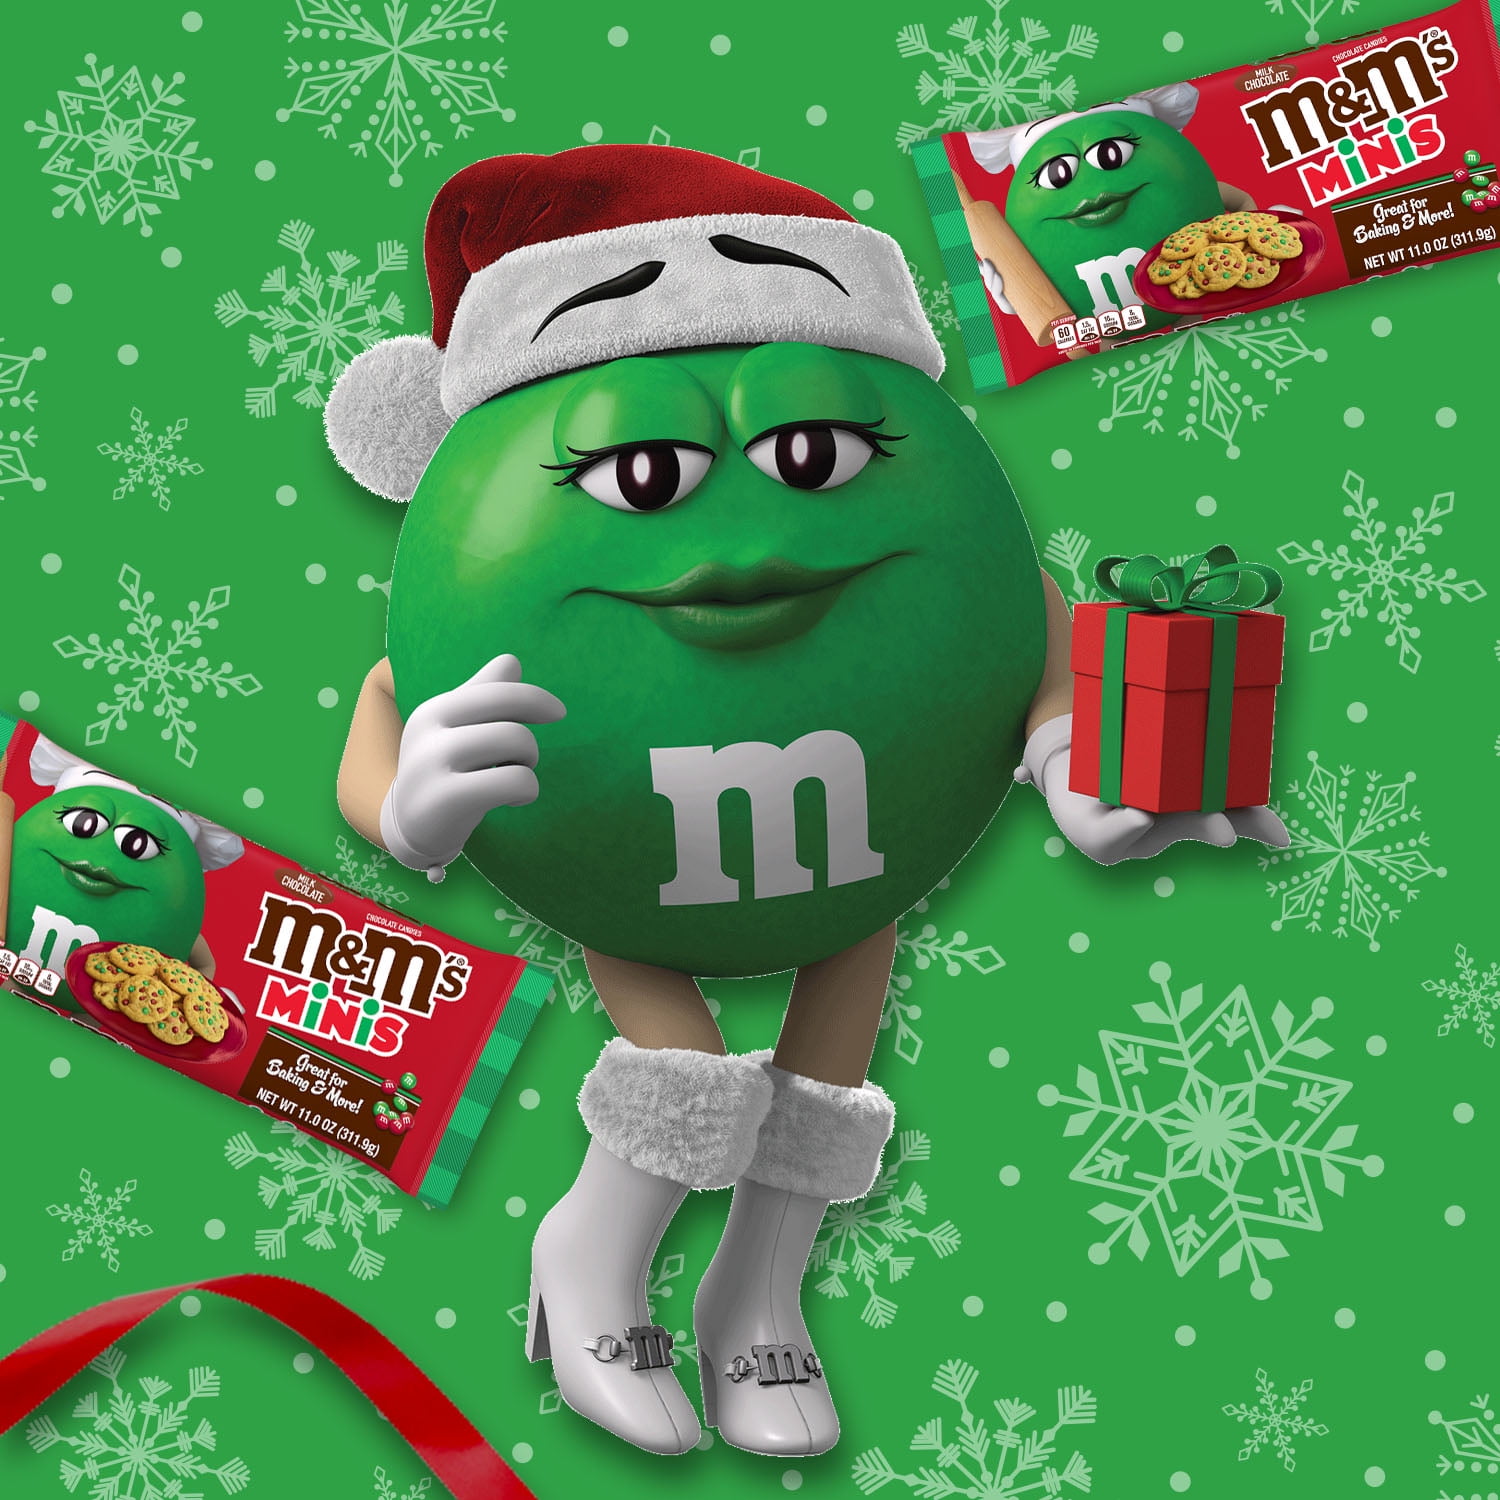 67 M&m christmas ideas  christmas, m m candy, m&m characters